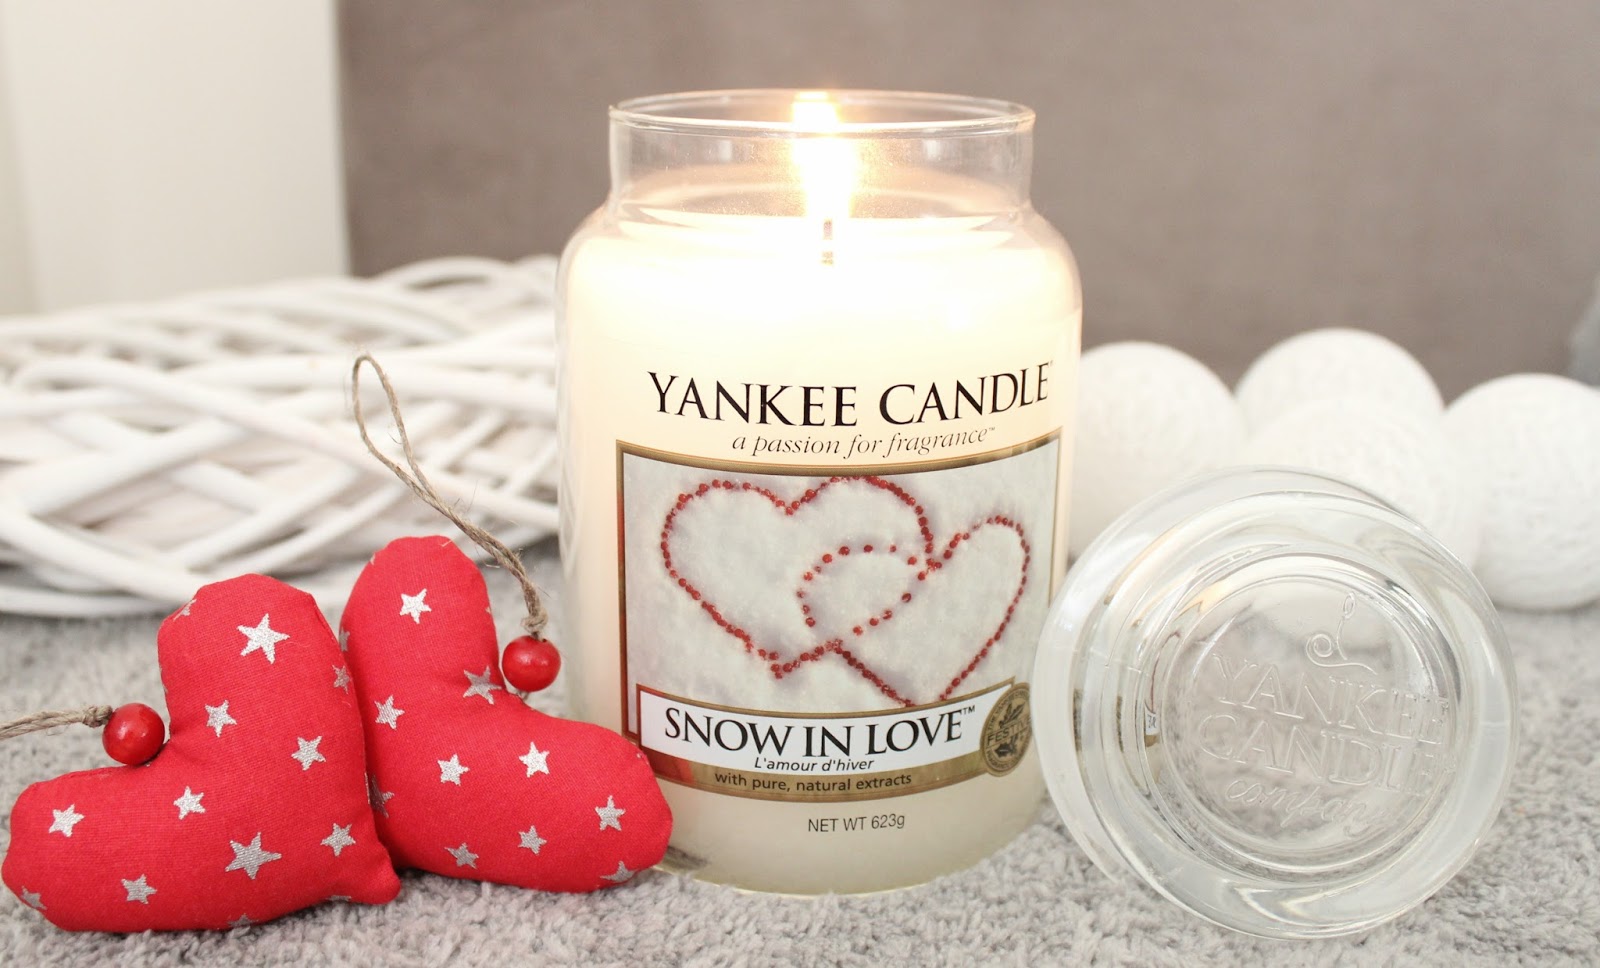 Yankee Candle "SNOW IN LOVE"